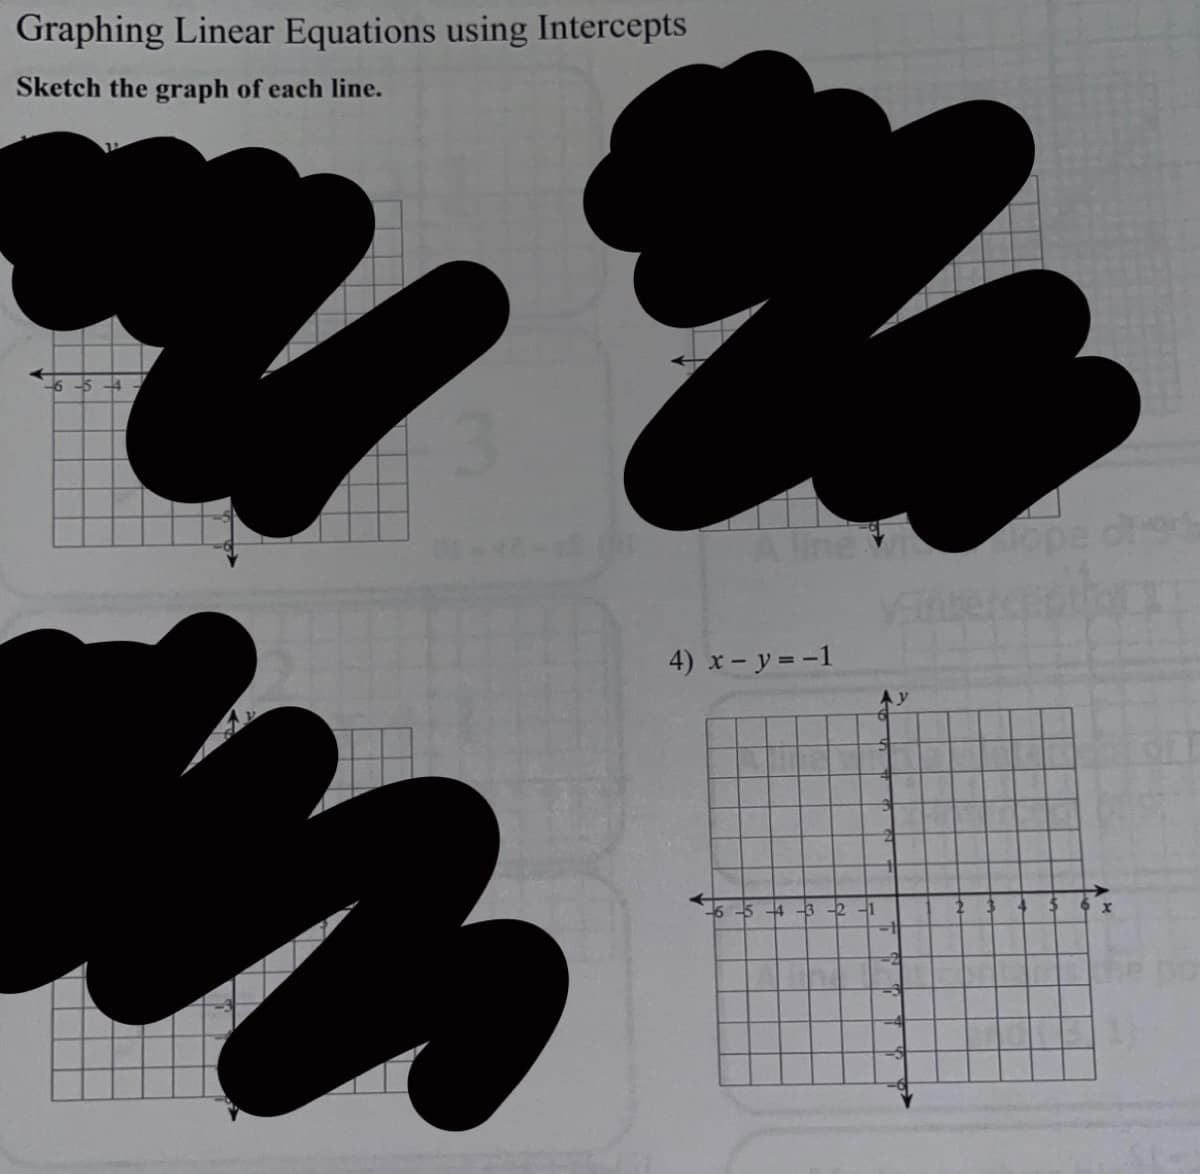 Graphing Linear Equations using Intercepts
Sketch the graph of each line.
1%
-6-5-4
line
4) x - y = -1
-5-4-3-2-1
y
2 3
for
4
5
6 x
1)